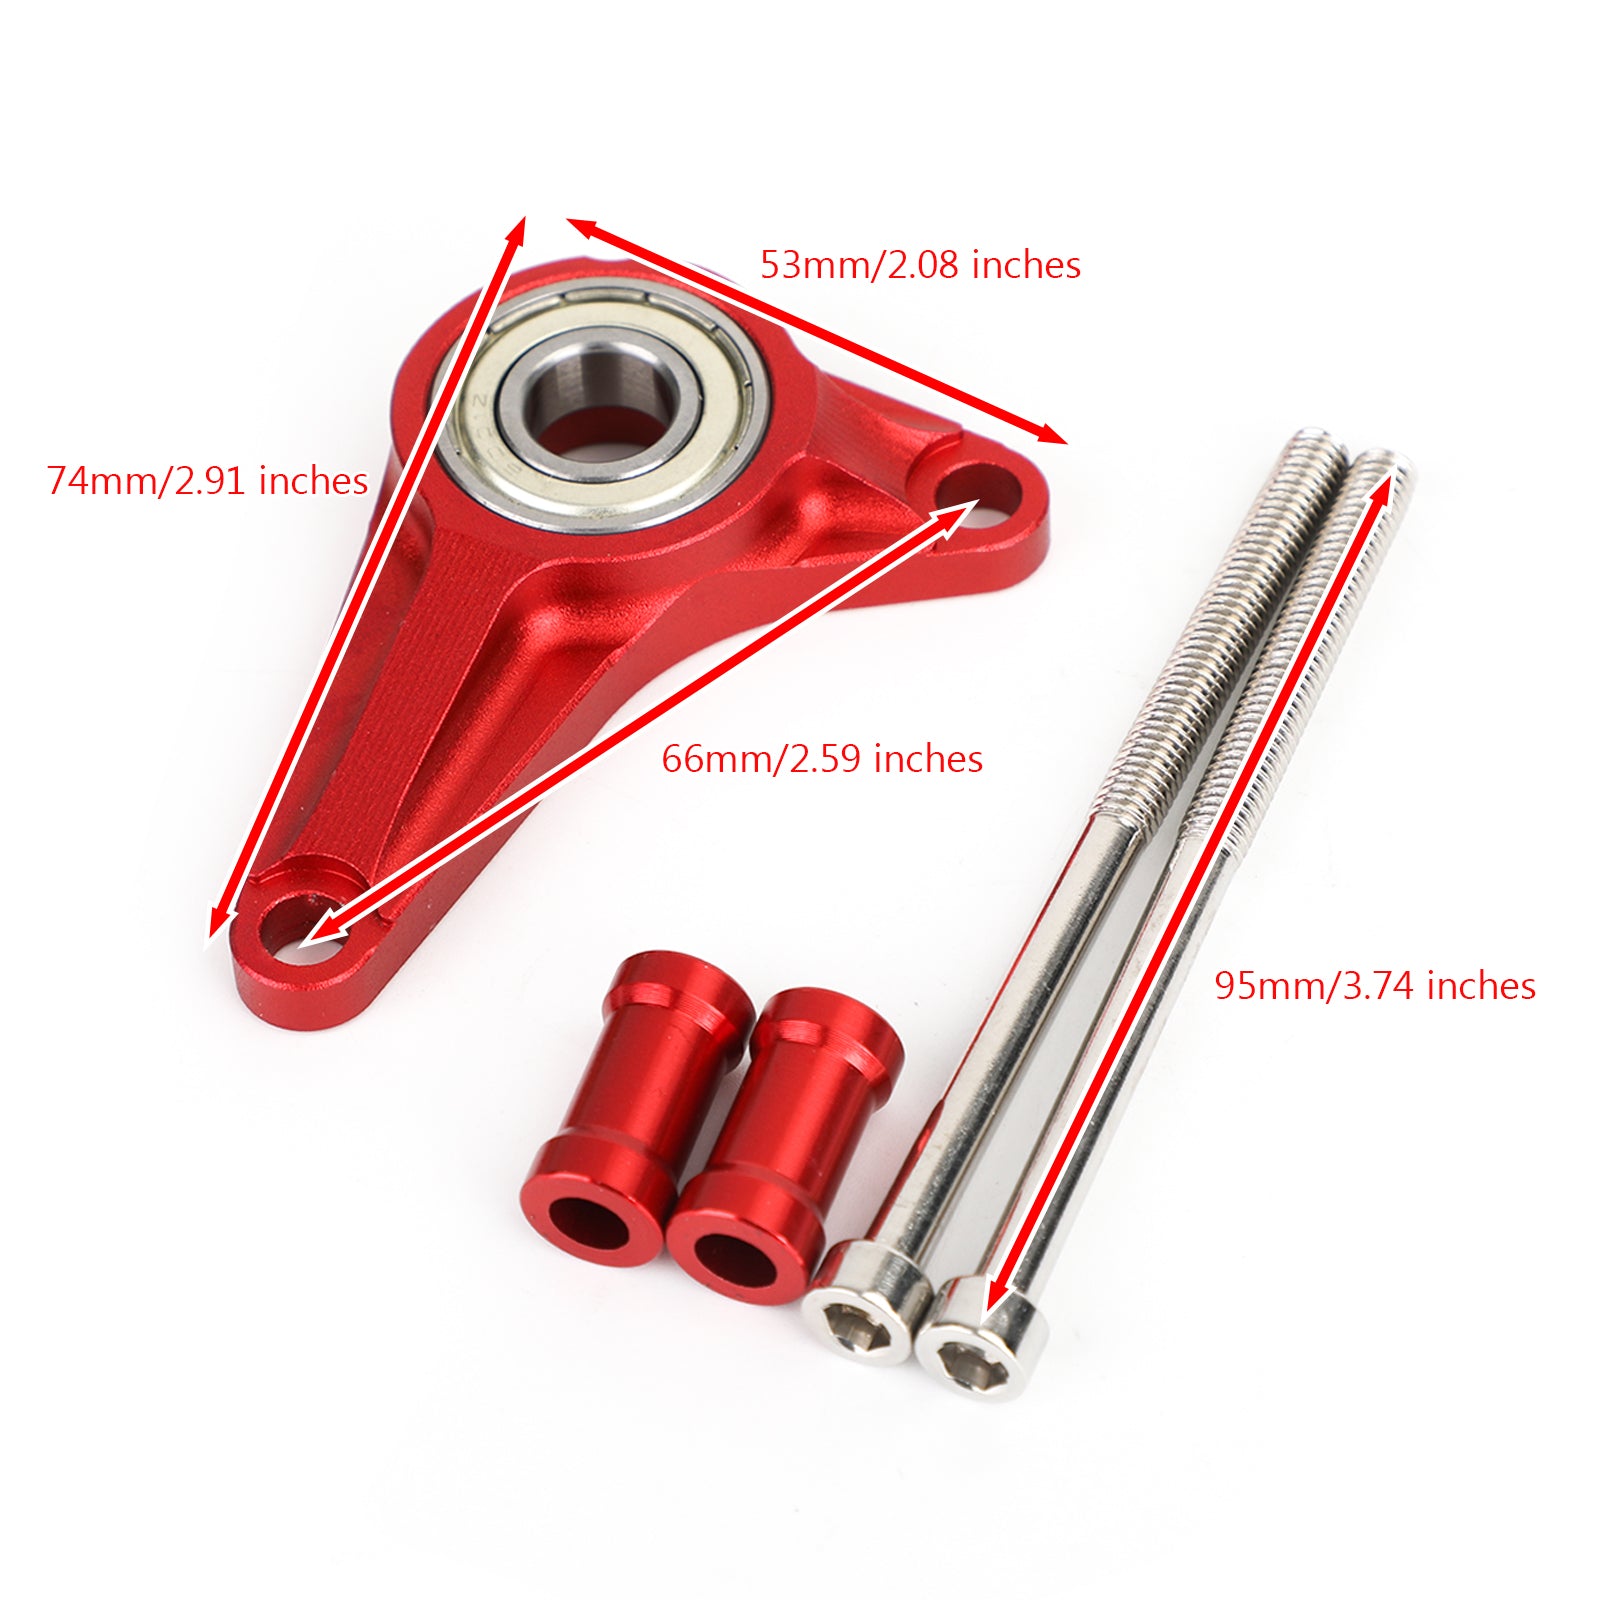 Honda MSX125 Grom 125 13-15 MSX125SF Grom 125 16-19 Shifting Gear Stabilizer w/ Mounting Bolts Red